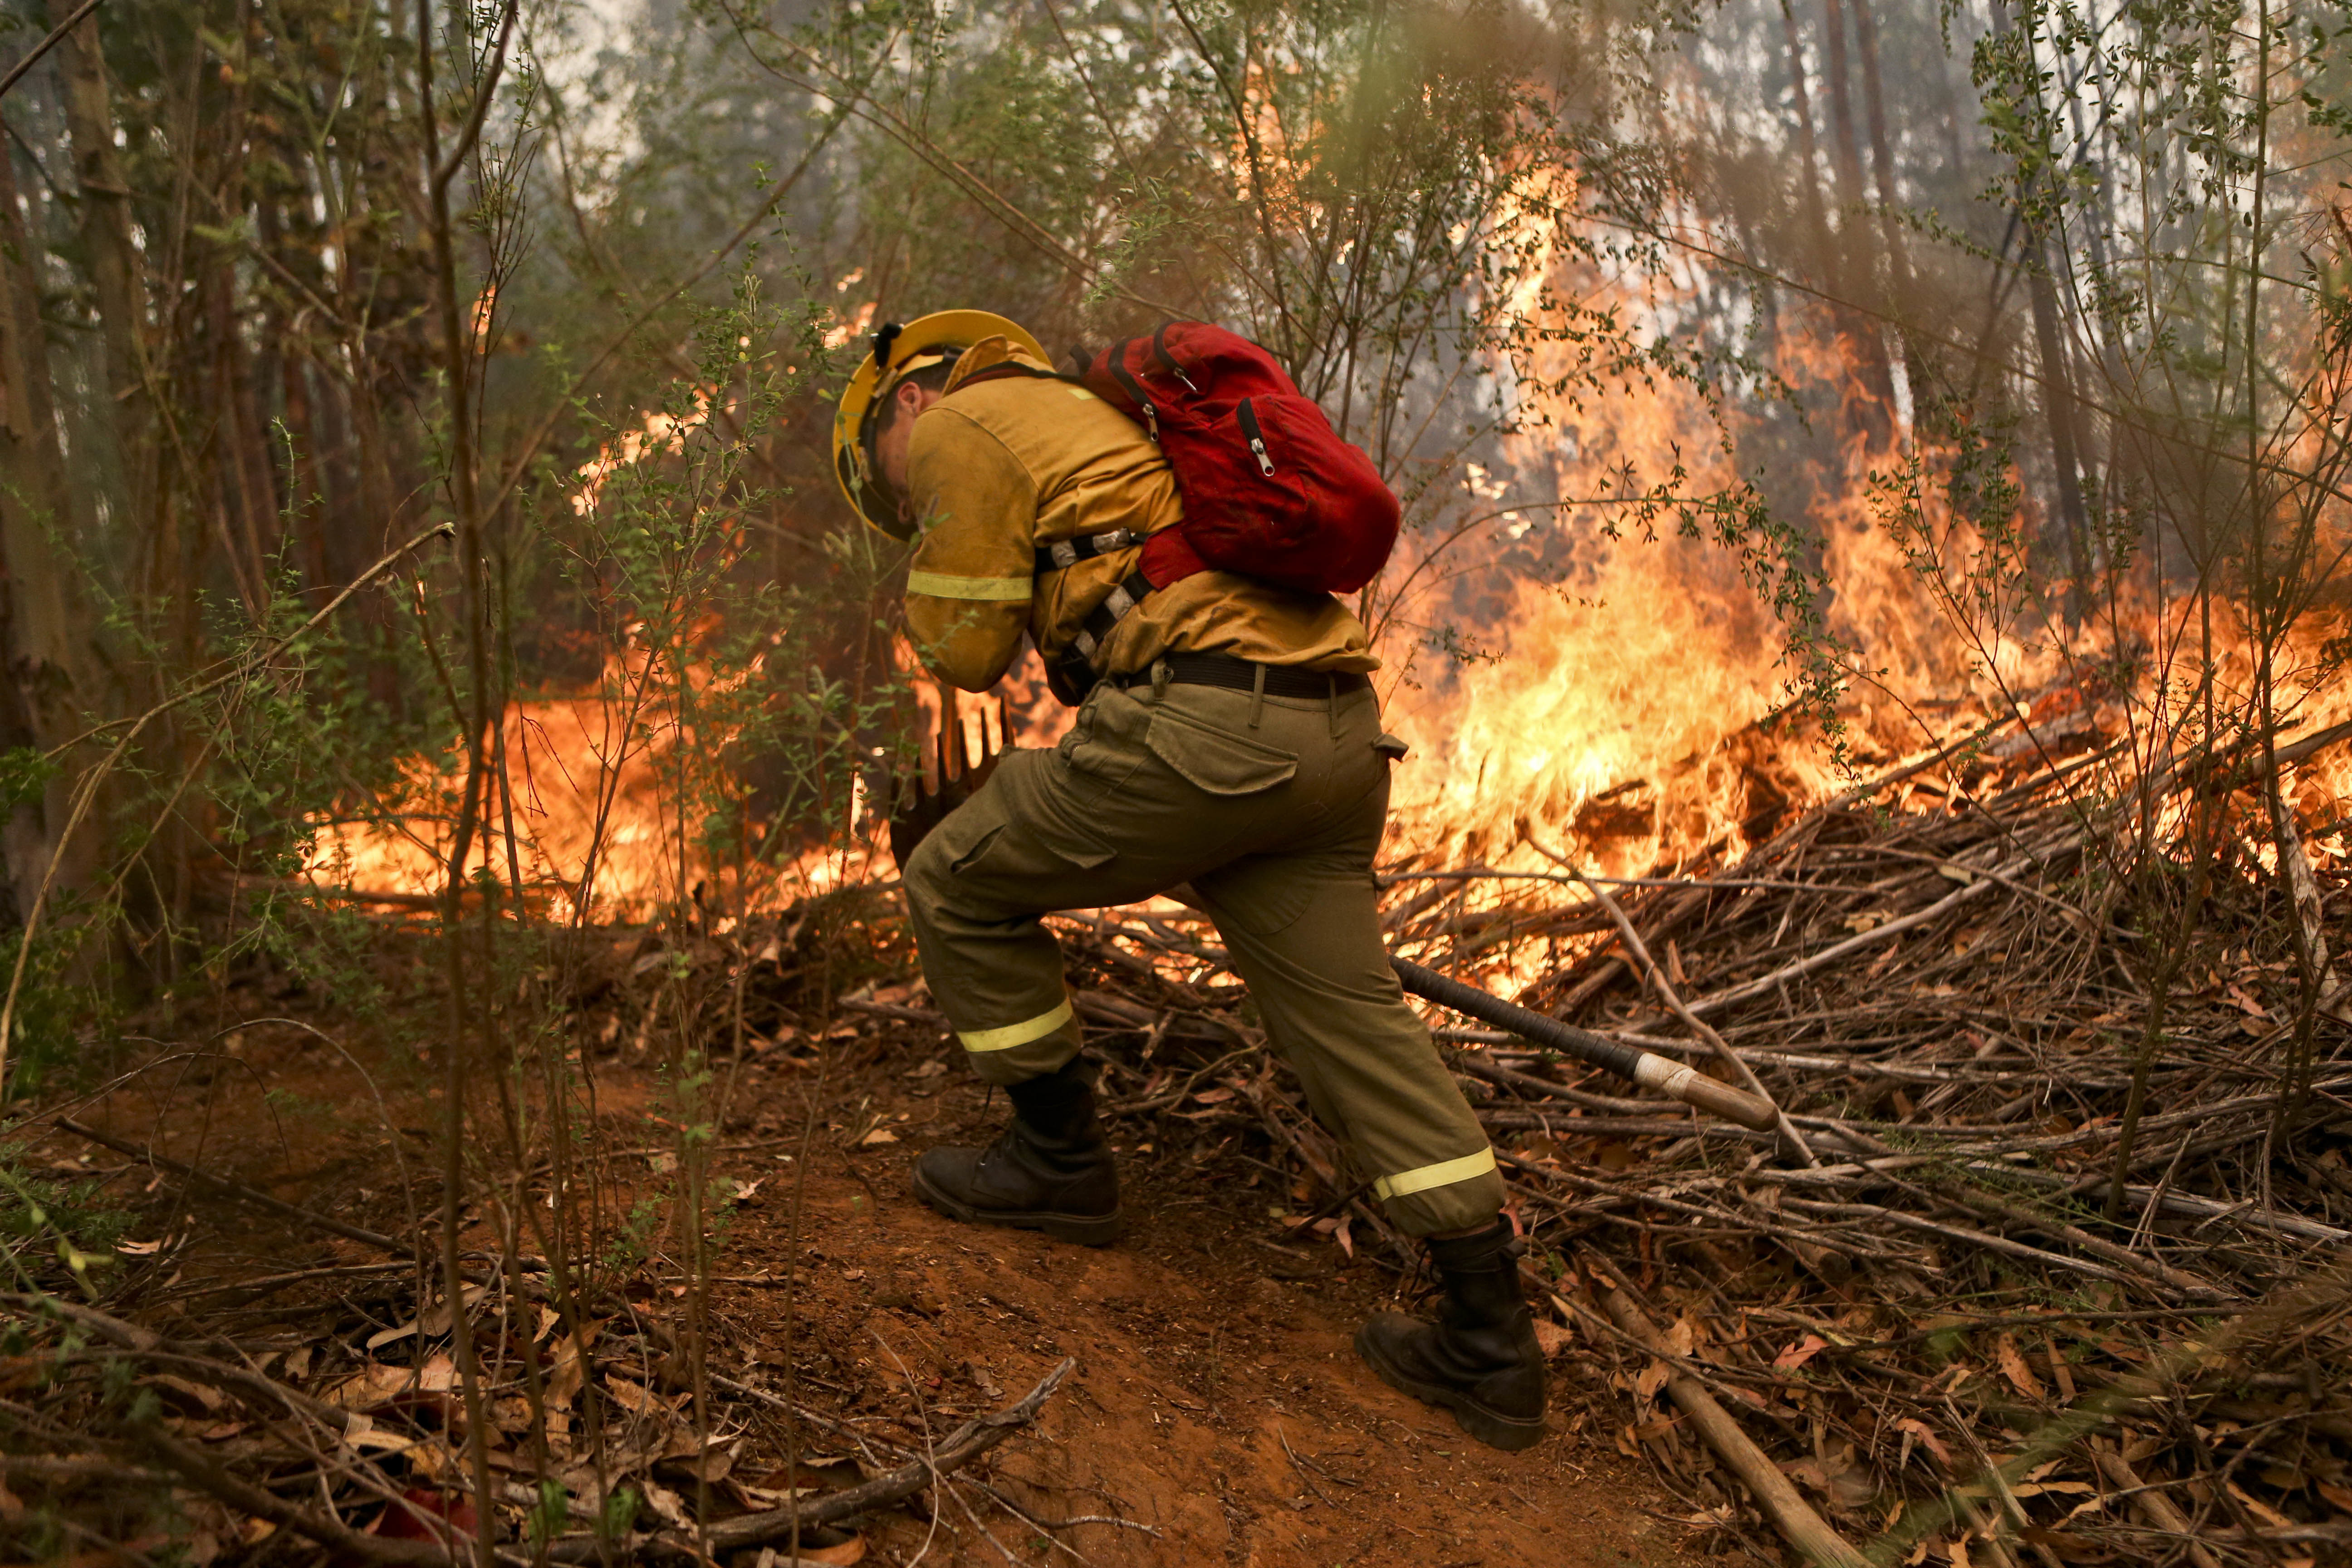 A firefighter digs a trench in an effort to stop the advancement of a wildfire in the Florida community of Concepcion, Chile, Friday, Jan. 27, 2017. Fires have been raging in central and southern Chile, fanned by strong winds, hot temperatures and a prolonged drought. Emergency services have battled the flames non-stop for days with thousands of firefighters on the ground and helicopters and small airplanes in the air. (AP Photo/Esteban Felix)